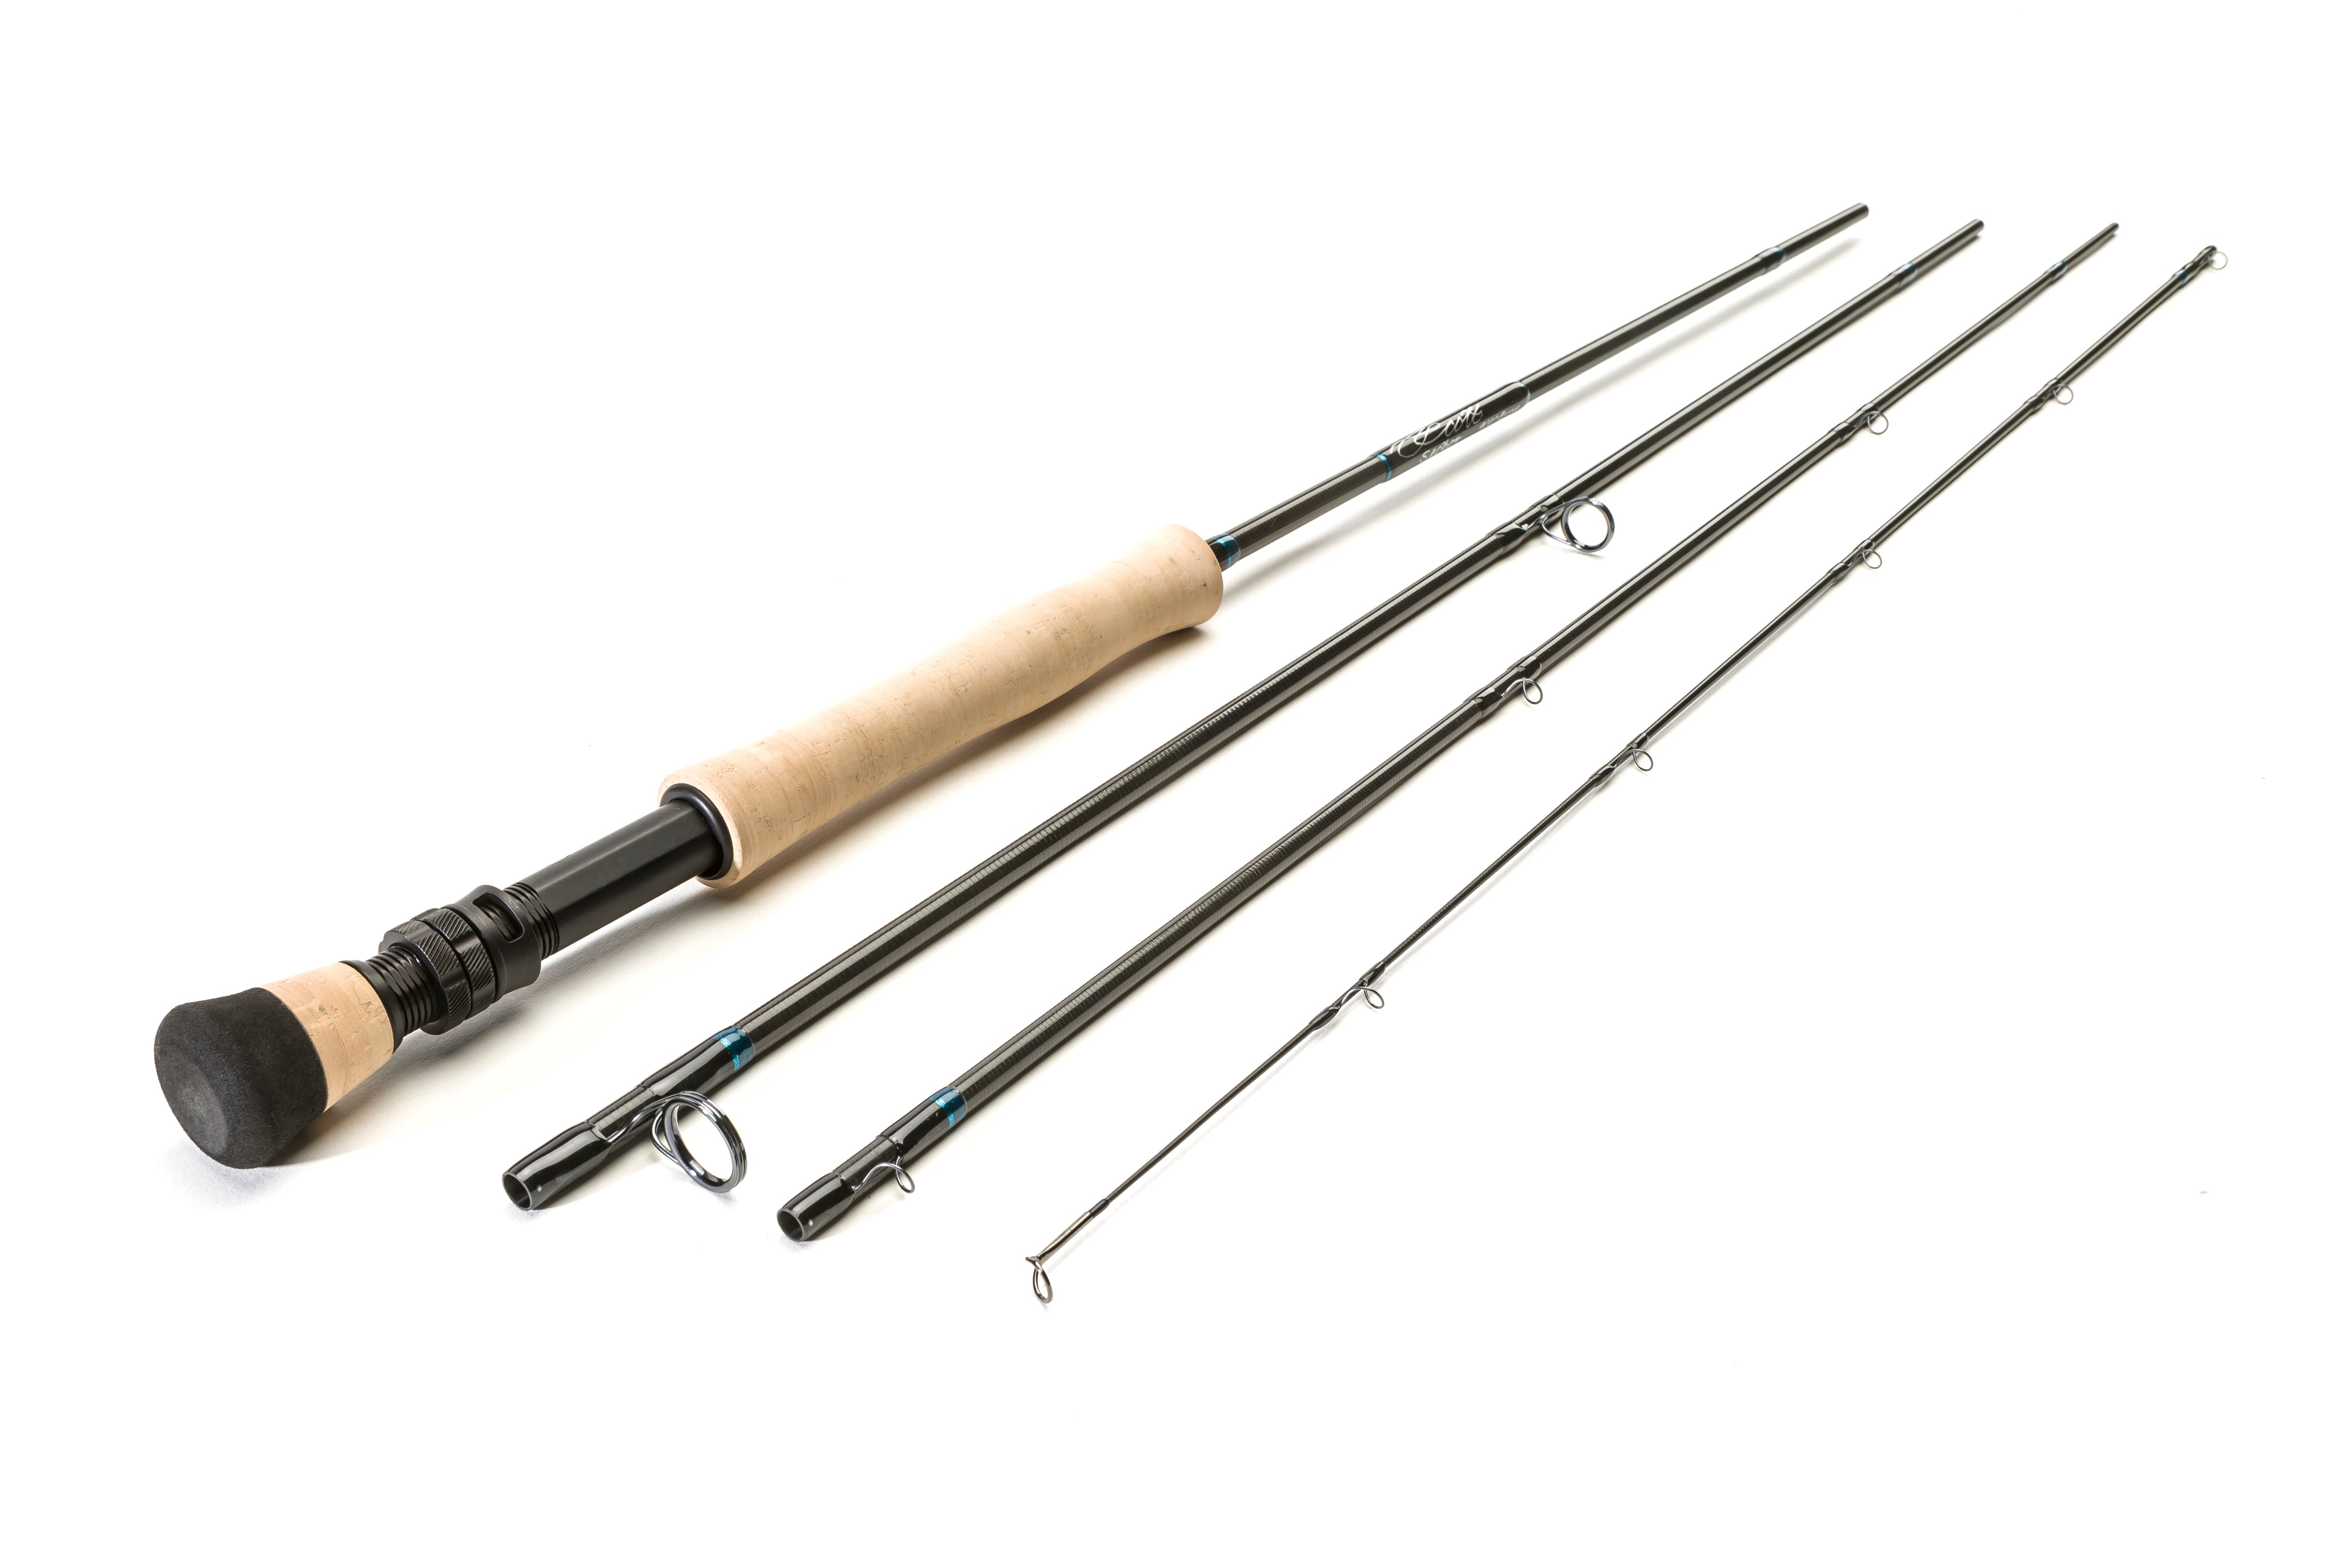 Wild Water Fly Fishing AX Series Fly Rod, IM8 Graphite Blank, 3/4/5/6/7/8/9/10/12 wt Rods, 56/7/8/9/10/11 ft